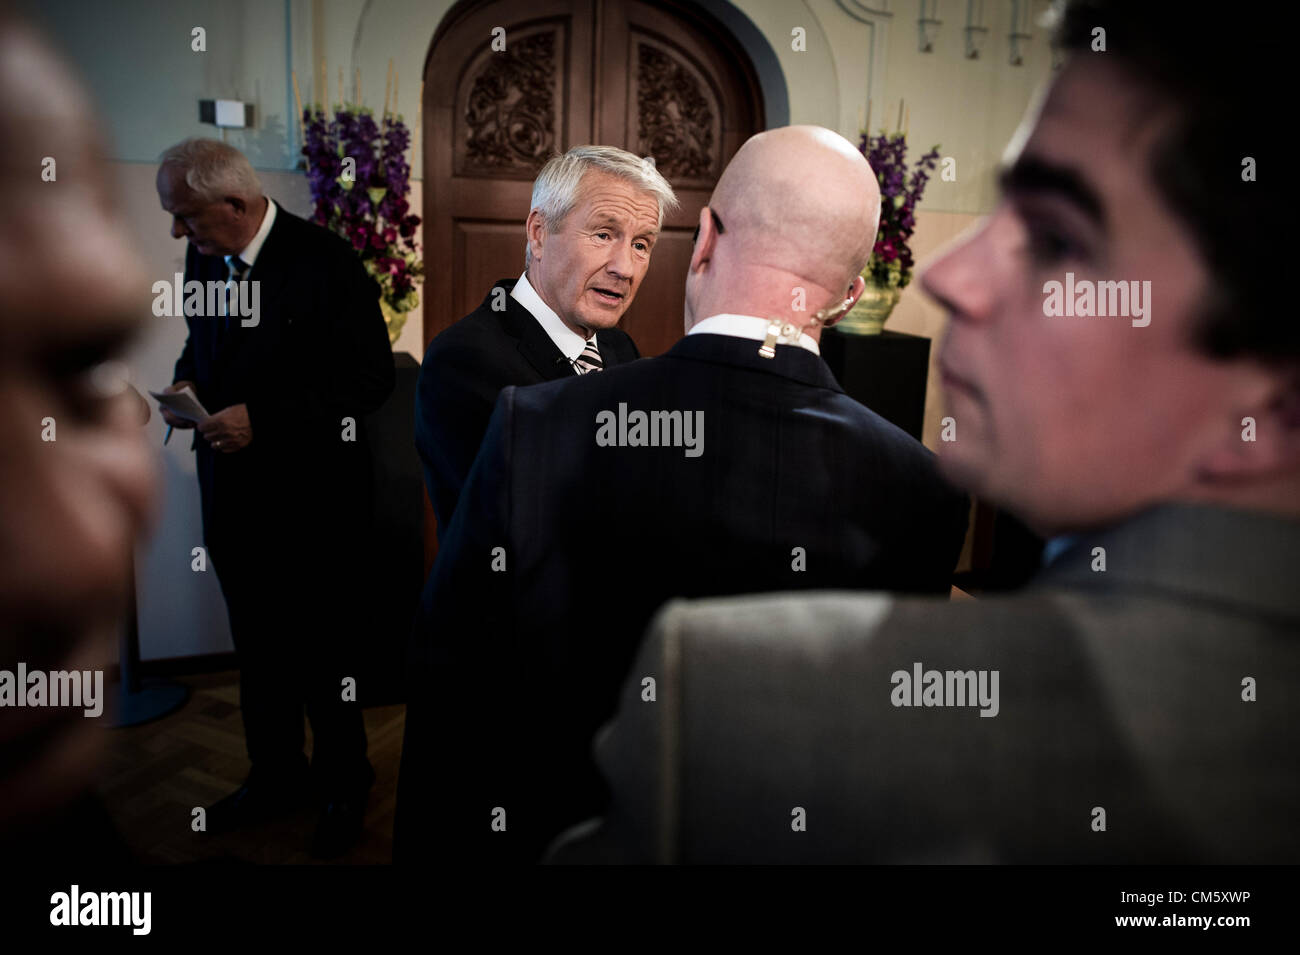 Oslo, Norway. 12th October 2012. Norwegian Nobel Committee Chairman Thorbjoern Jagland announce that EU (European Union) wins the The Nobel Peace Prize 2012 Credit: © Alexander Widding / Alamy Live News  Stock Photo